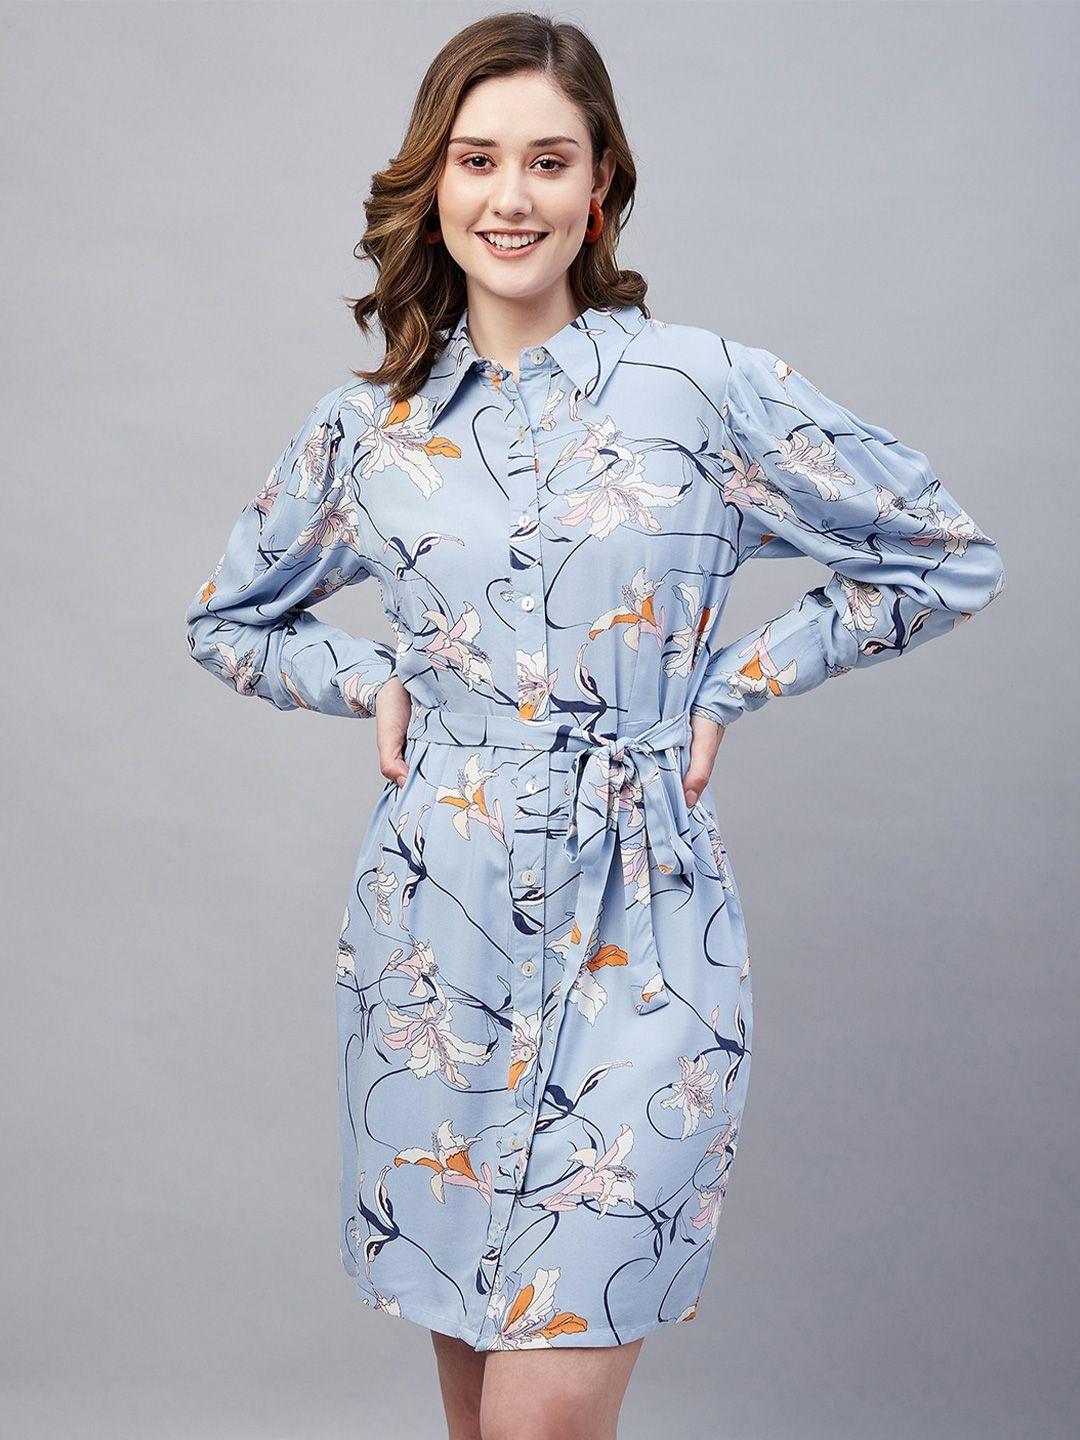 marie-claire-floral-printed-cuffed-sleeve-shirt-dress